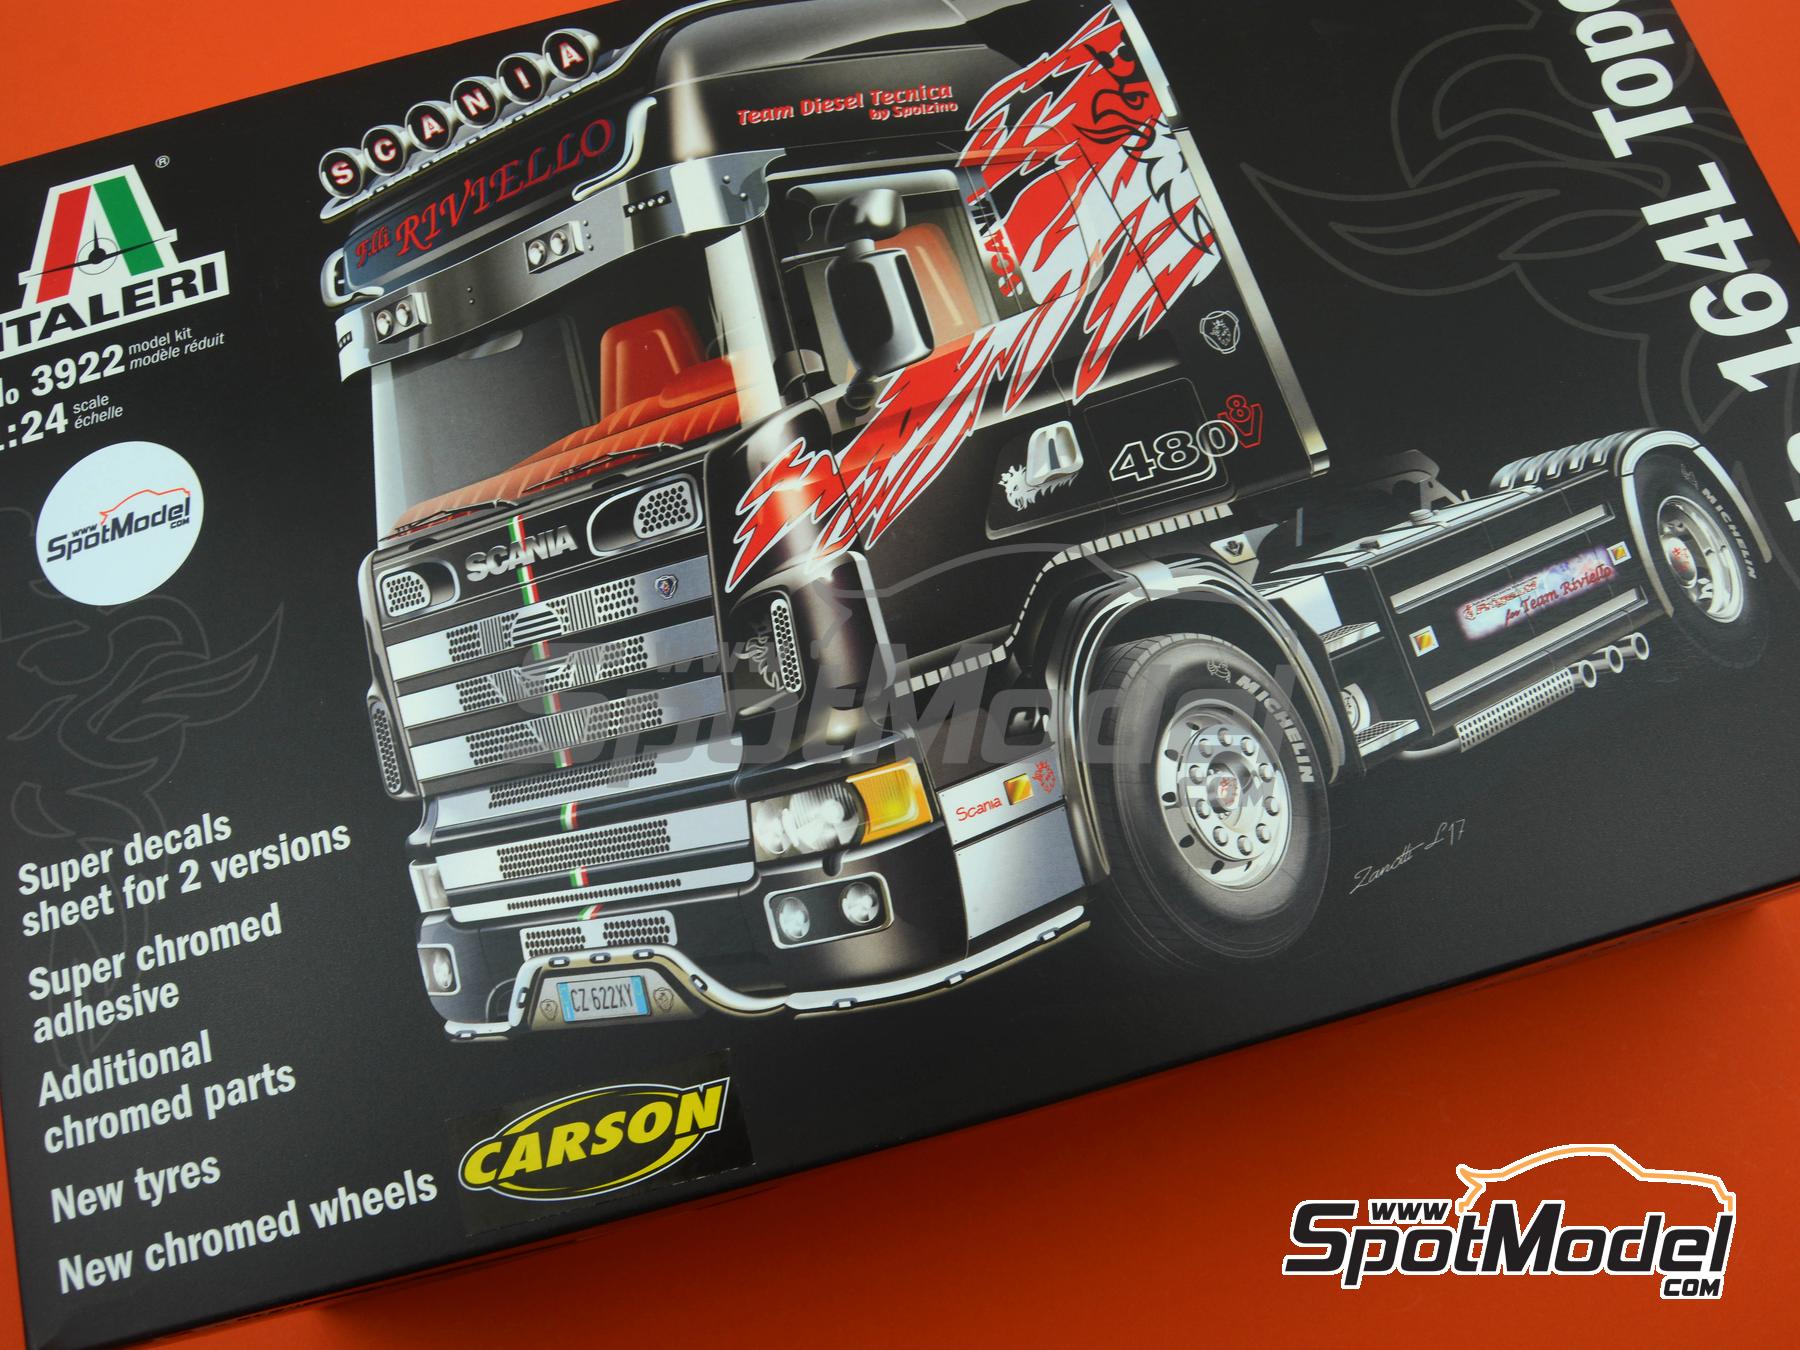 Scania 164L Topclass 580 CV. Tractor head scale model kit in 1/24 scale  manufactured by Italeri (ref. 3922, also 8001283039222)